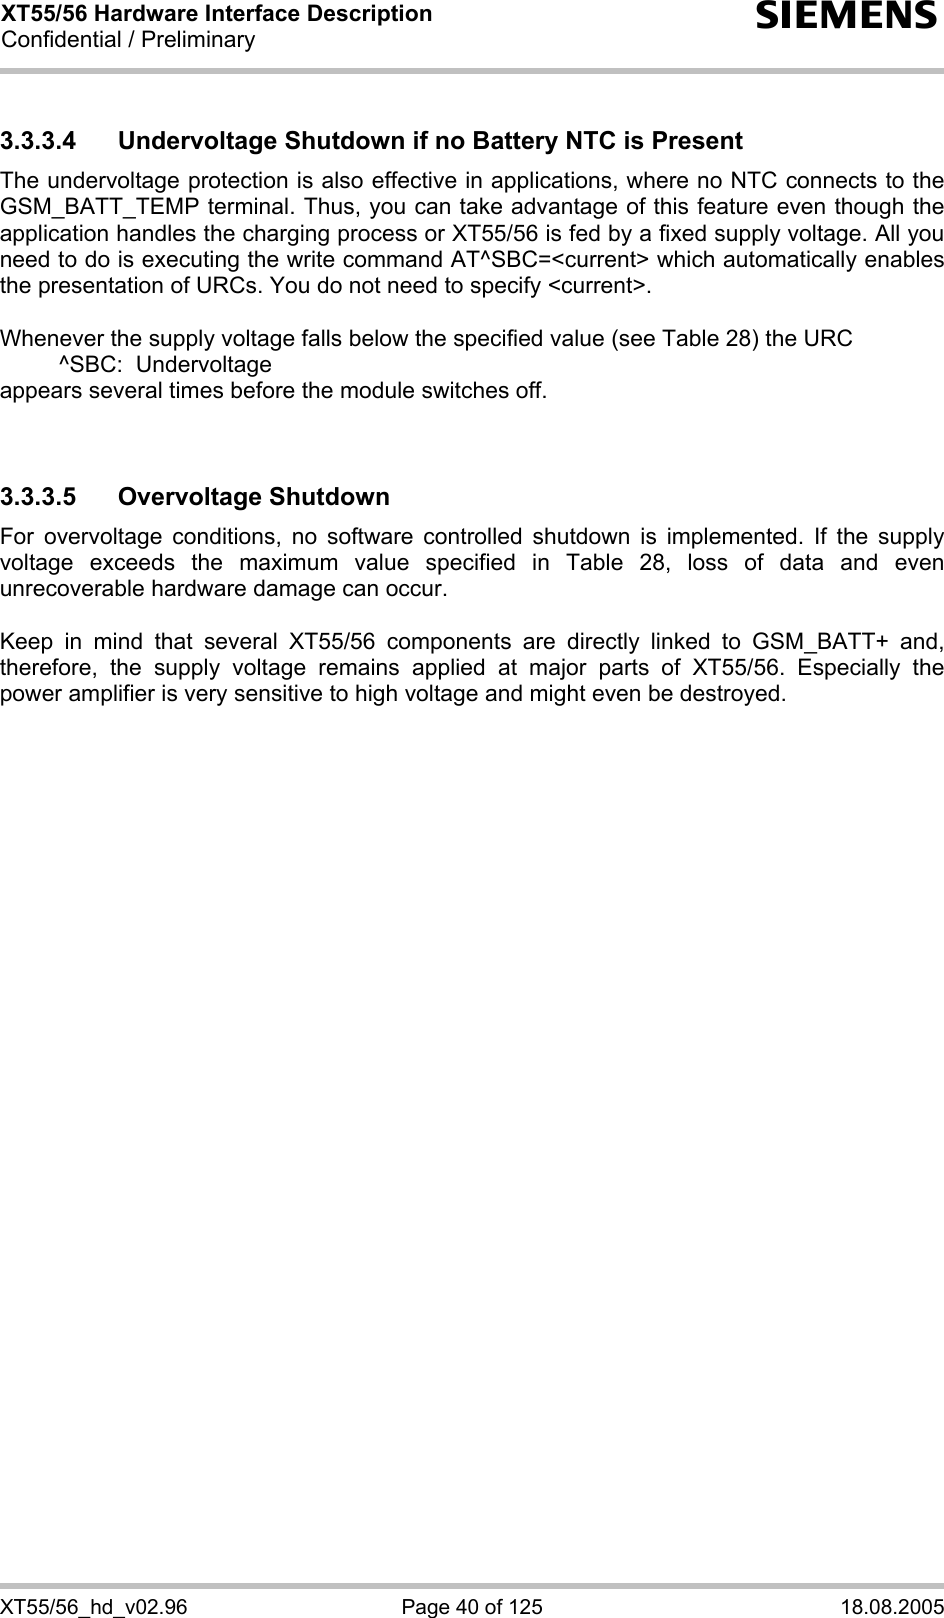 XT55/56 Hardware Interface Description Confidential / Preliminary s XT55/56_hd_v02.96  Page 40 of 125  18.08.2005 3.3.3.4  Undervoltage Shutdown if no Battery NTC is Present The undervoltage protection is also effective in applications, where no NTC connects to the GSM_BATT_TEMP terminal. Thus, you can take advantage of this feature even though the application handles the charging process or XT55/56 is fed by a fixed supply voltage. All you need to do is executing the write command AT^SBC=&lt;current&gt; which automatically enables the presentation of URCs. You do not need to specify &lt;current&gt;.   Whenever the supply voltage falls below the specified value (see Table 28) the URC    ^SBC:  Undervoltage appears several times before the module switches off.   3.3.3.5 Overvoltage Shutdown For overvoltage conditions, no software controlled shutdown is implemented. If the supply voltage exceeds the maximum value specified in Table 28, loss of data and even unrecoverable hardware damage can occur.   Keep in mind that several XT55/56 components are directly linked to GSM_BATT+ and, therefore, the supply voltage remains applied at major parts of XT55/56. Especially the power amplifier is very sensitive to high voltage and might even be destroyed.     